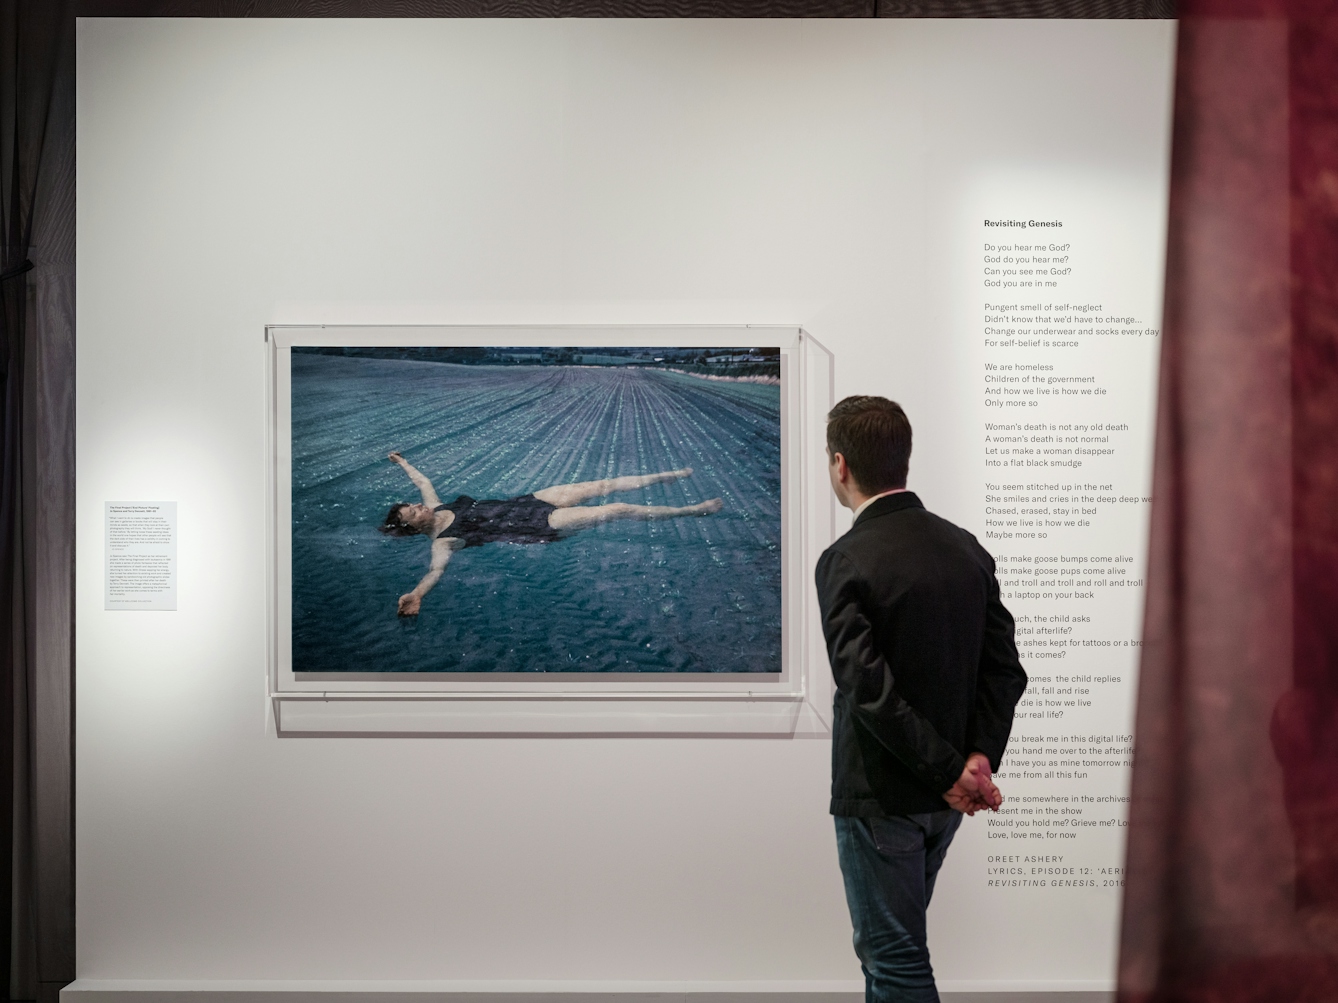 Photograph of a man in a dark jacket and jeans viewing a photograph of a woman floating belly-upwards in a blue pool.  To the right of the man there is a poem called Revisiting Genesis